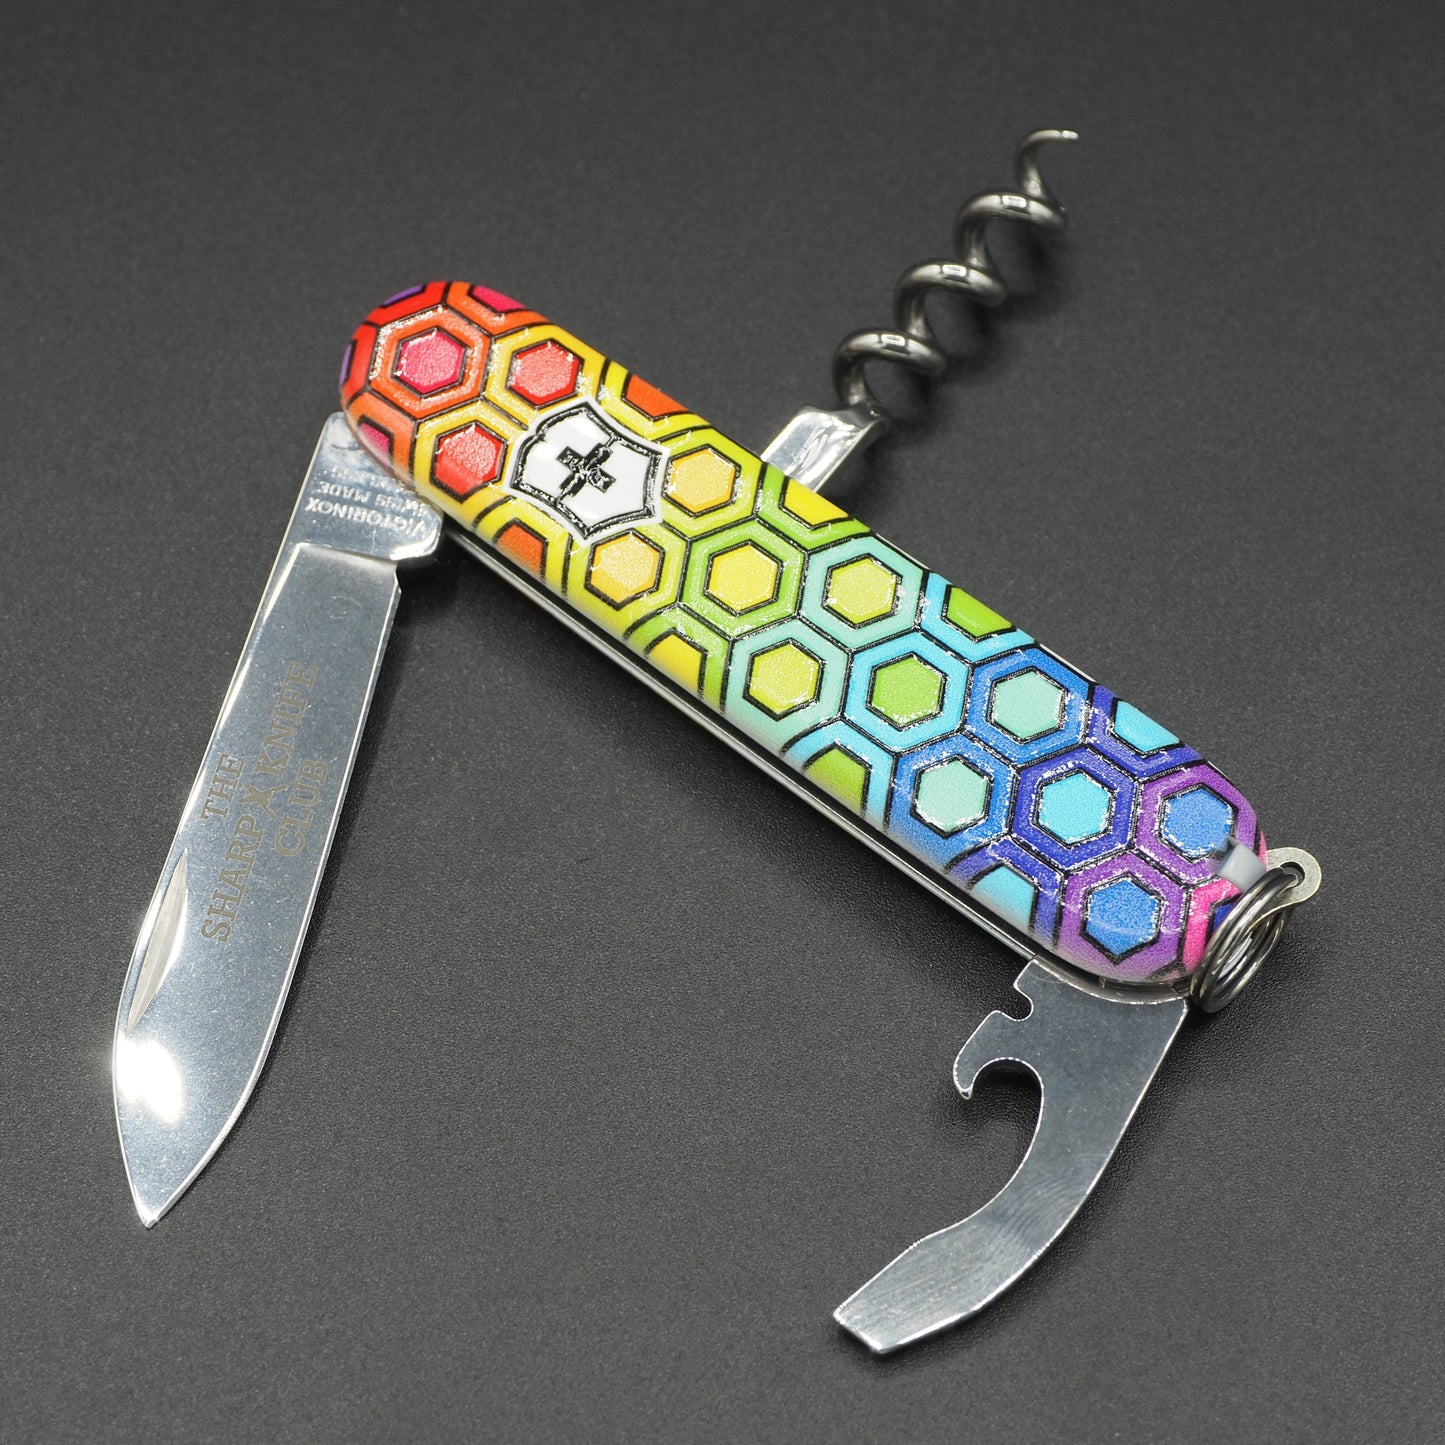 Victorinox Waiter 84mm "The Color 2" 3D The Sharp Knife Club Edition